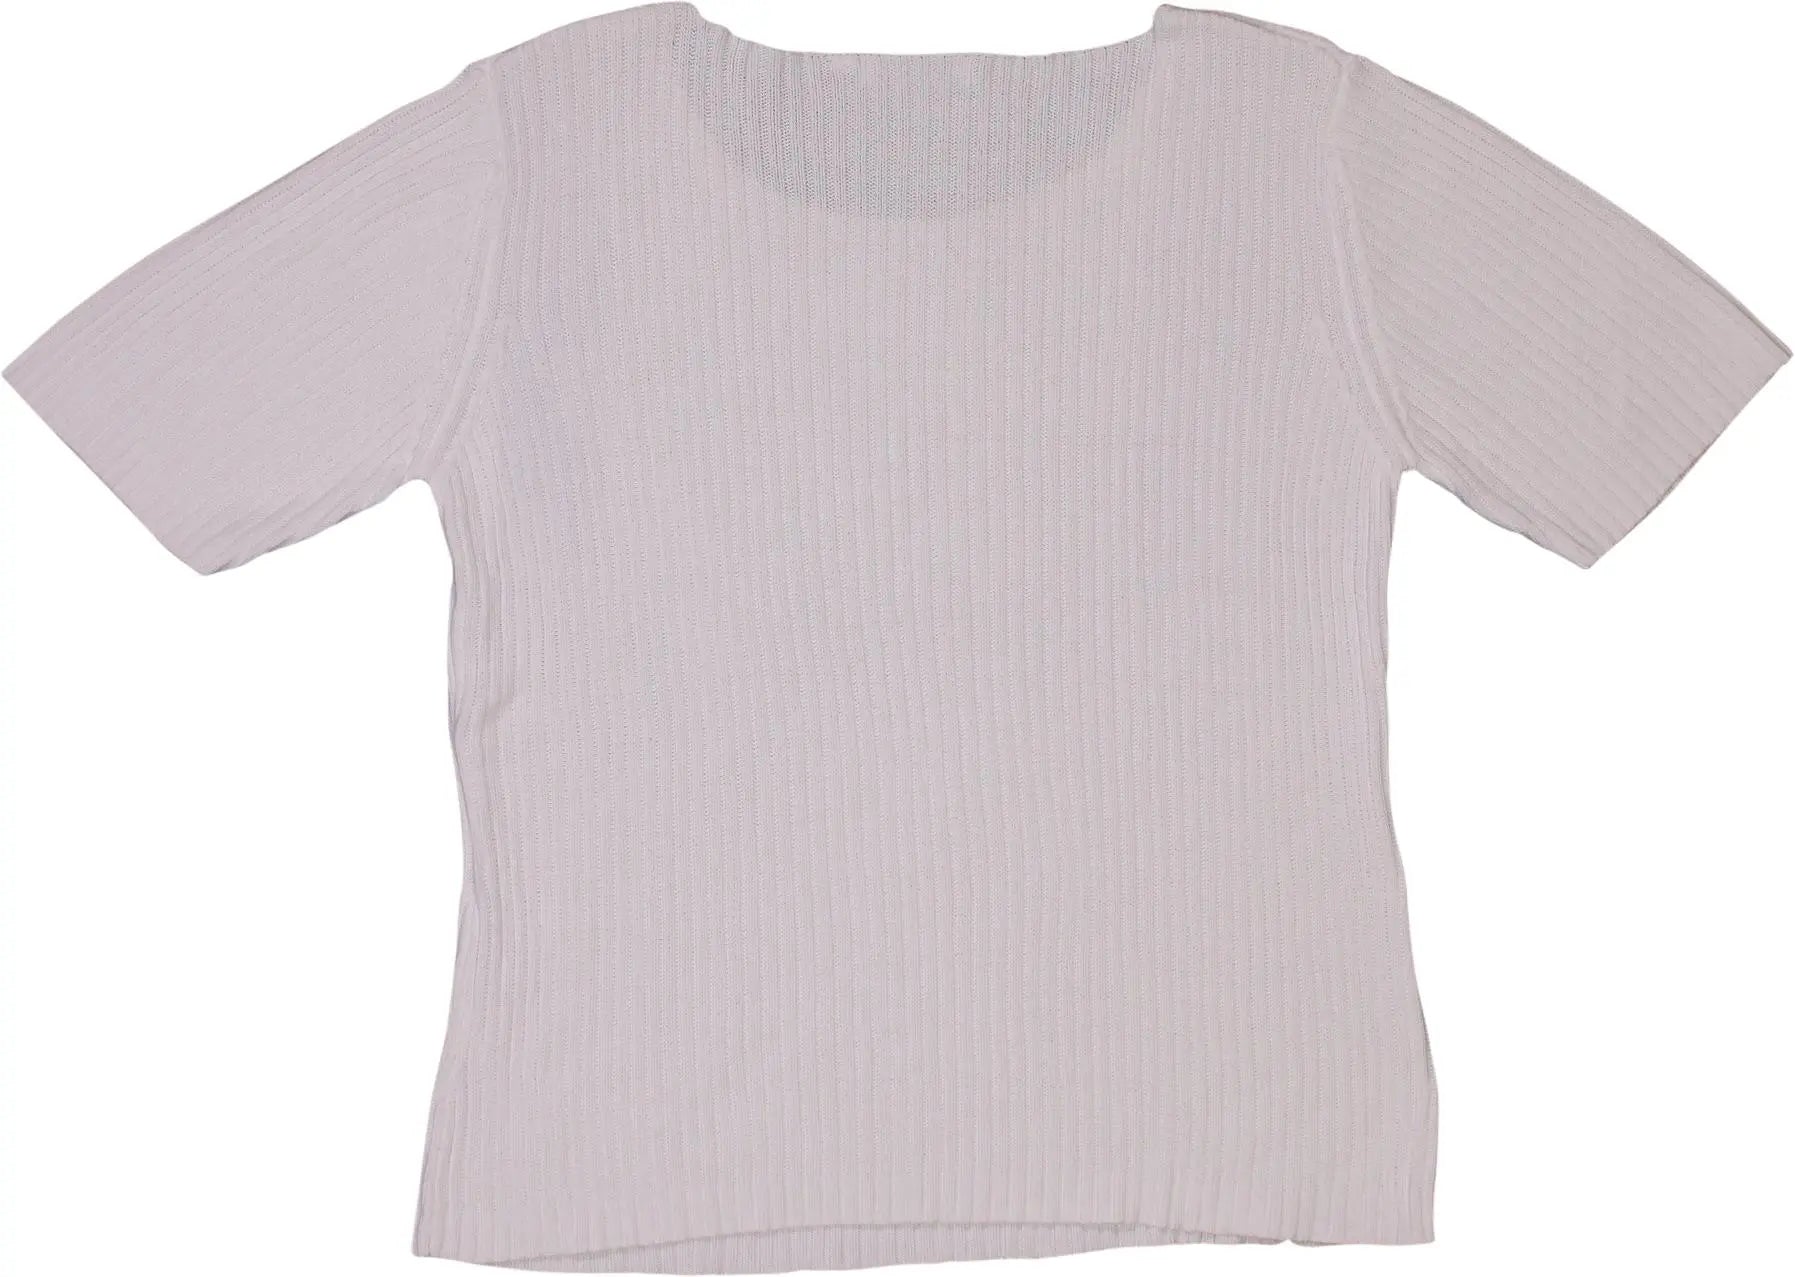 Bijenkorf - White Knitted Top- ThriftTale.com - Vintage and second handclothing